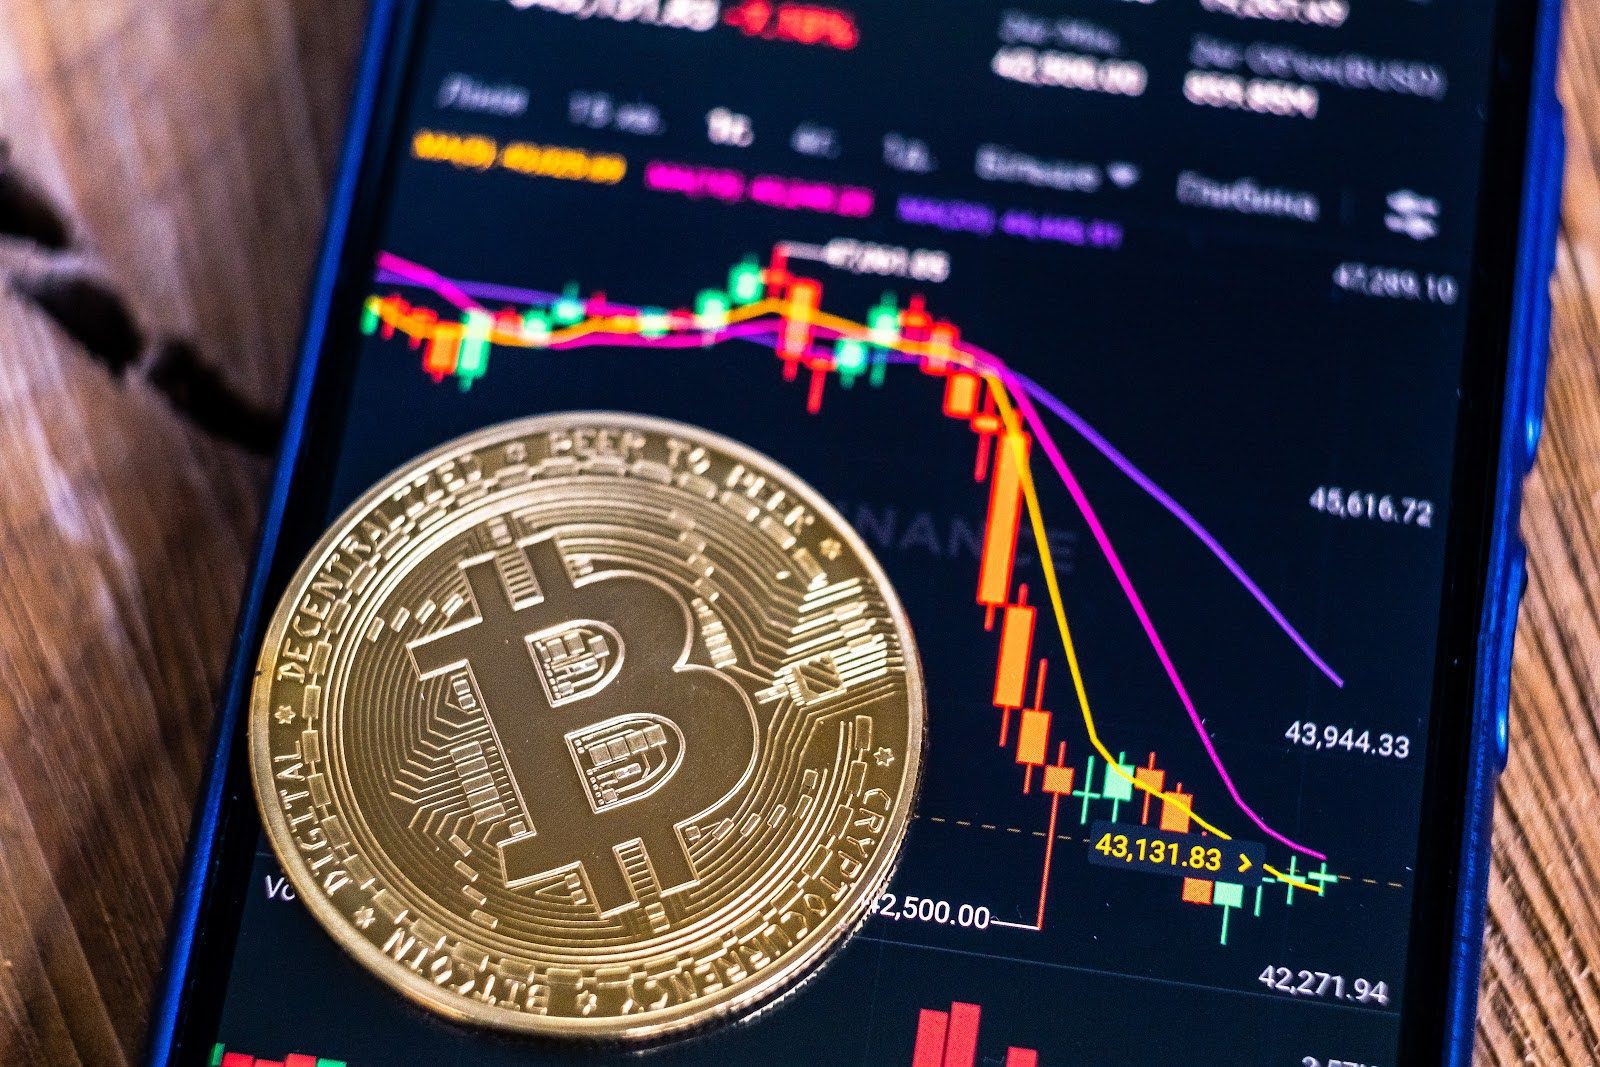 Will Bitcoin (BTC) to $50K Come Sooner or Later? Interest in Hedera (HBAR) & InQubeta (QUBE) Surges